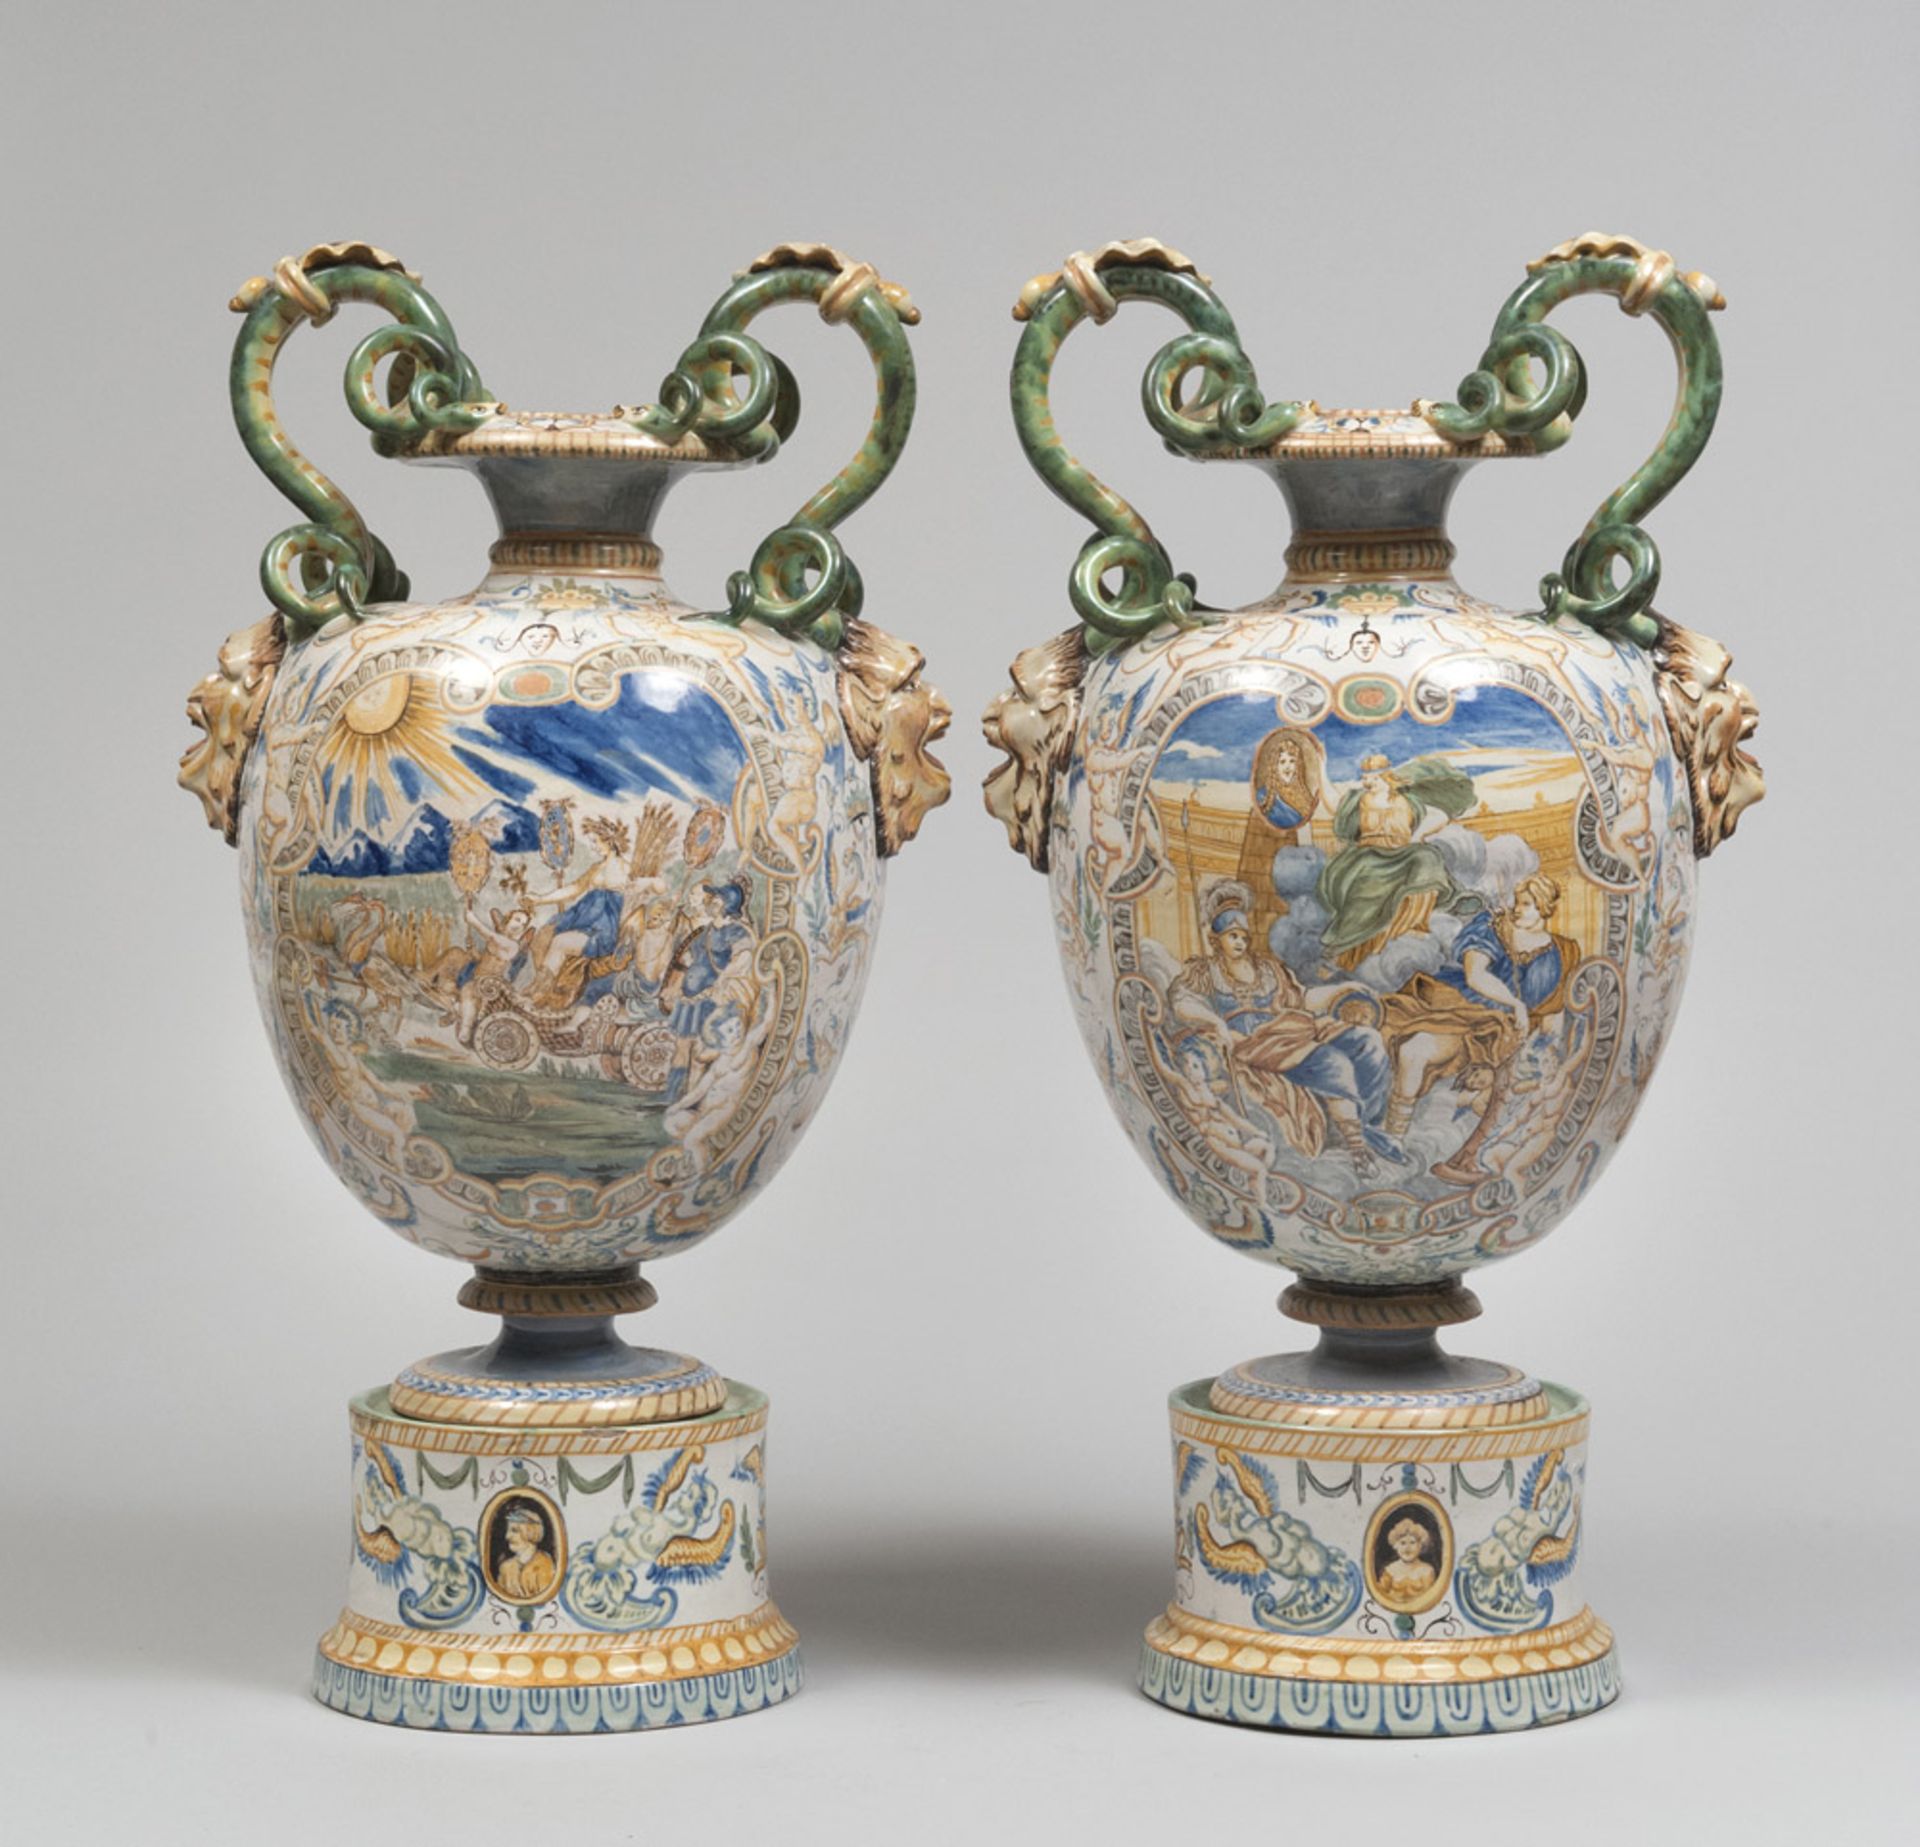 A PAIR OF CERAMIC VASES, NAPLES EARLY 20TH CENTURY